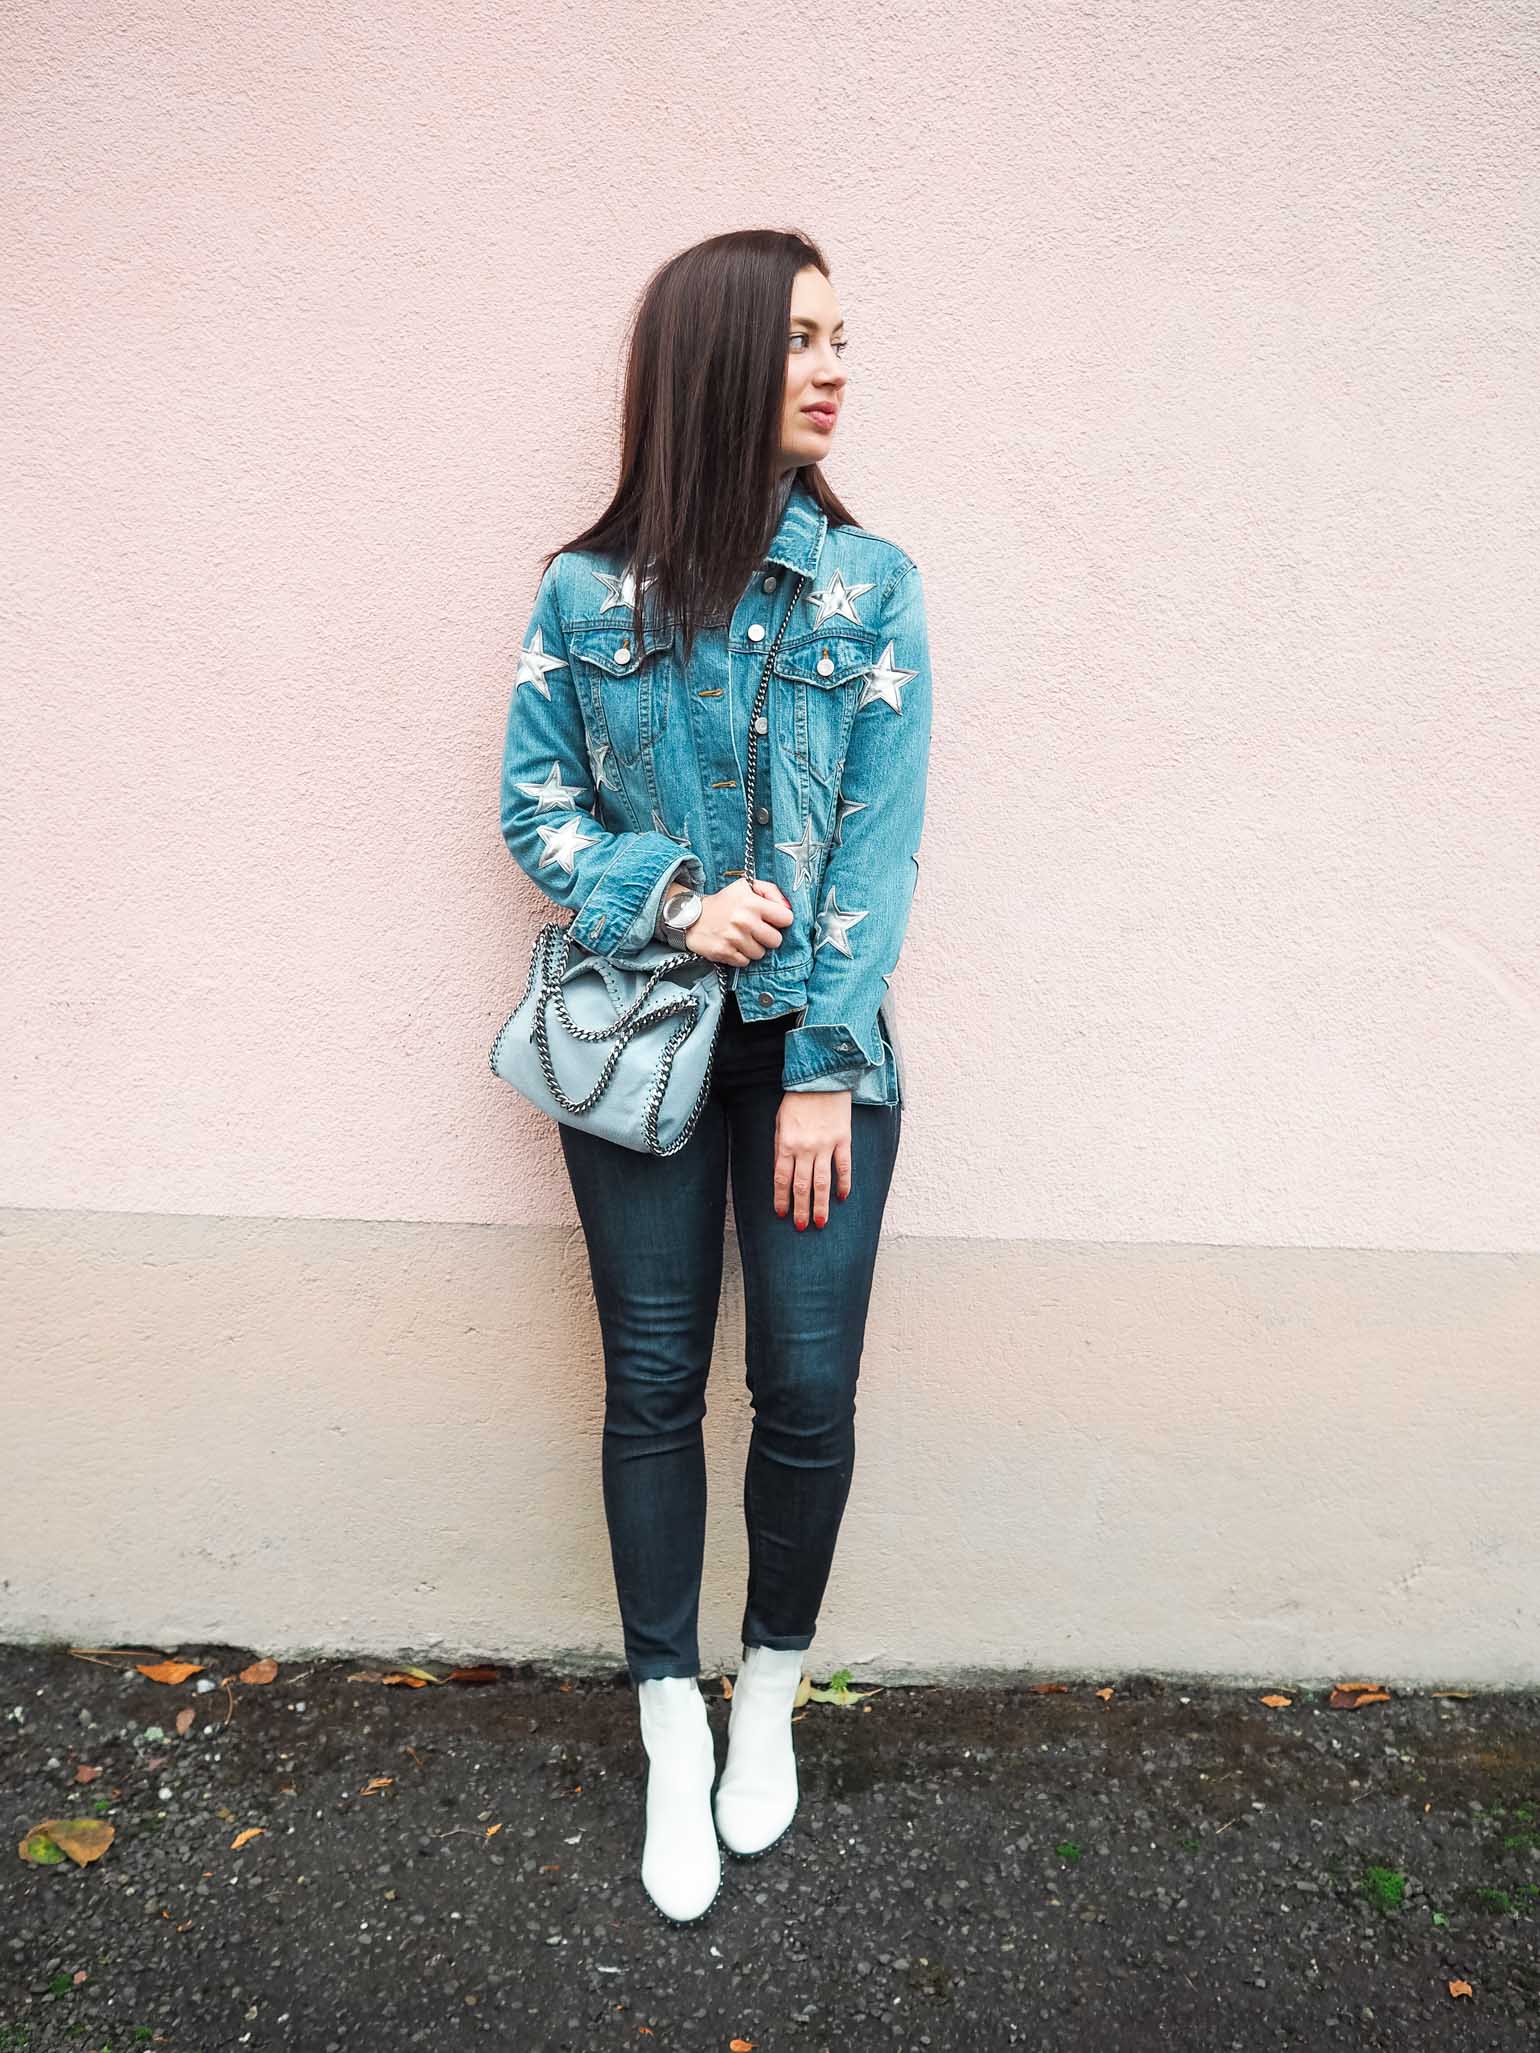 Cristina from The Brunette Nomad, Dallas fashion blogger living in Switzerland, shows you how to winterize your denim jacket using her favorite star printed denim jacket